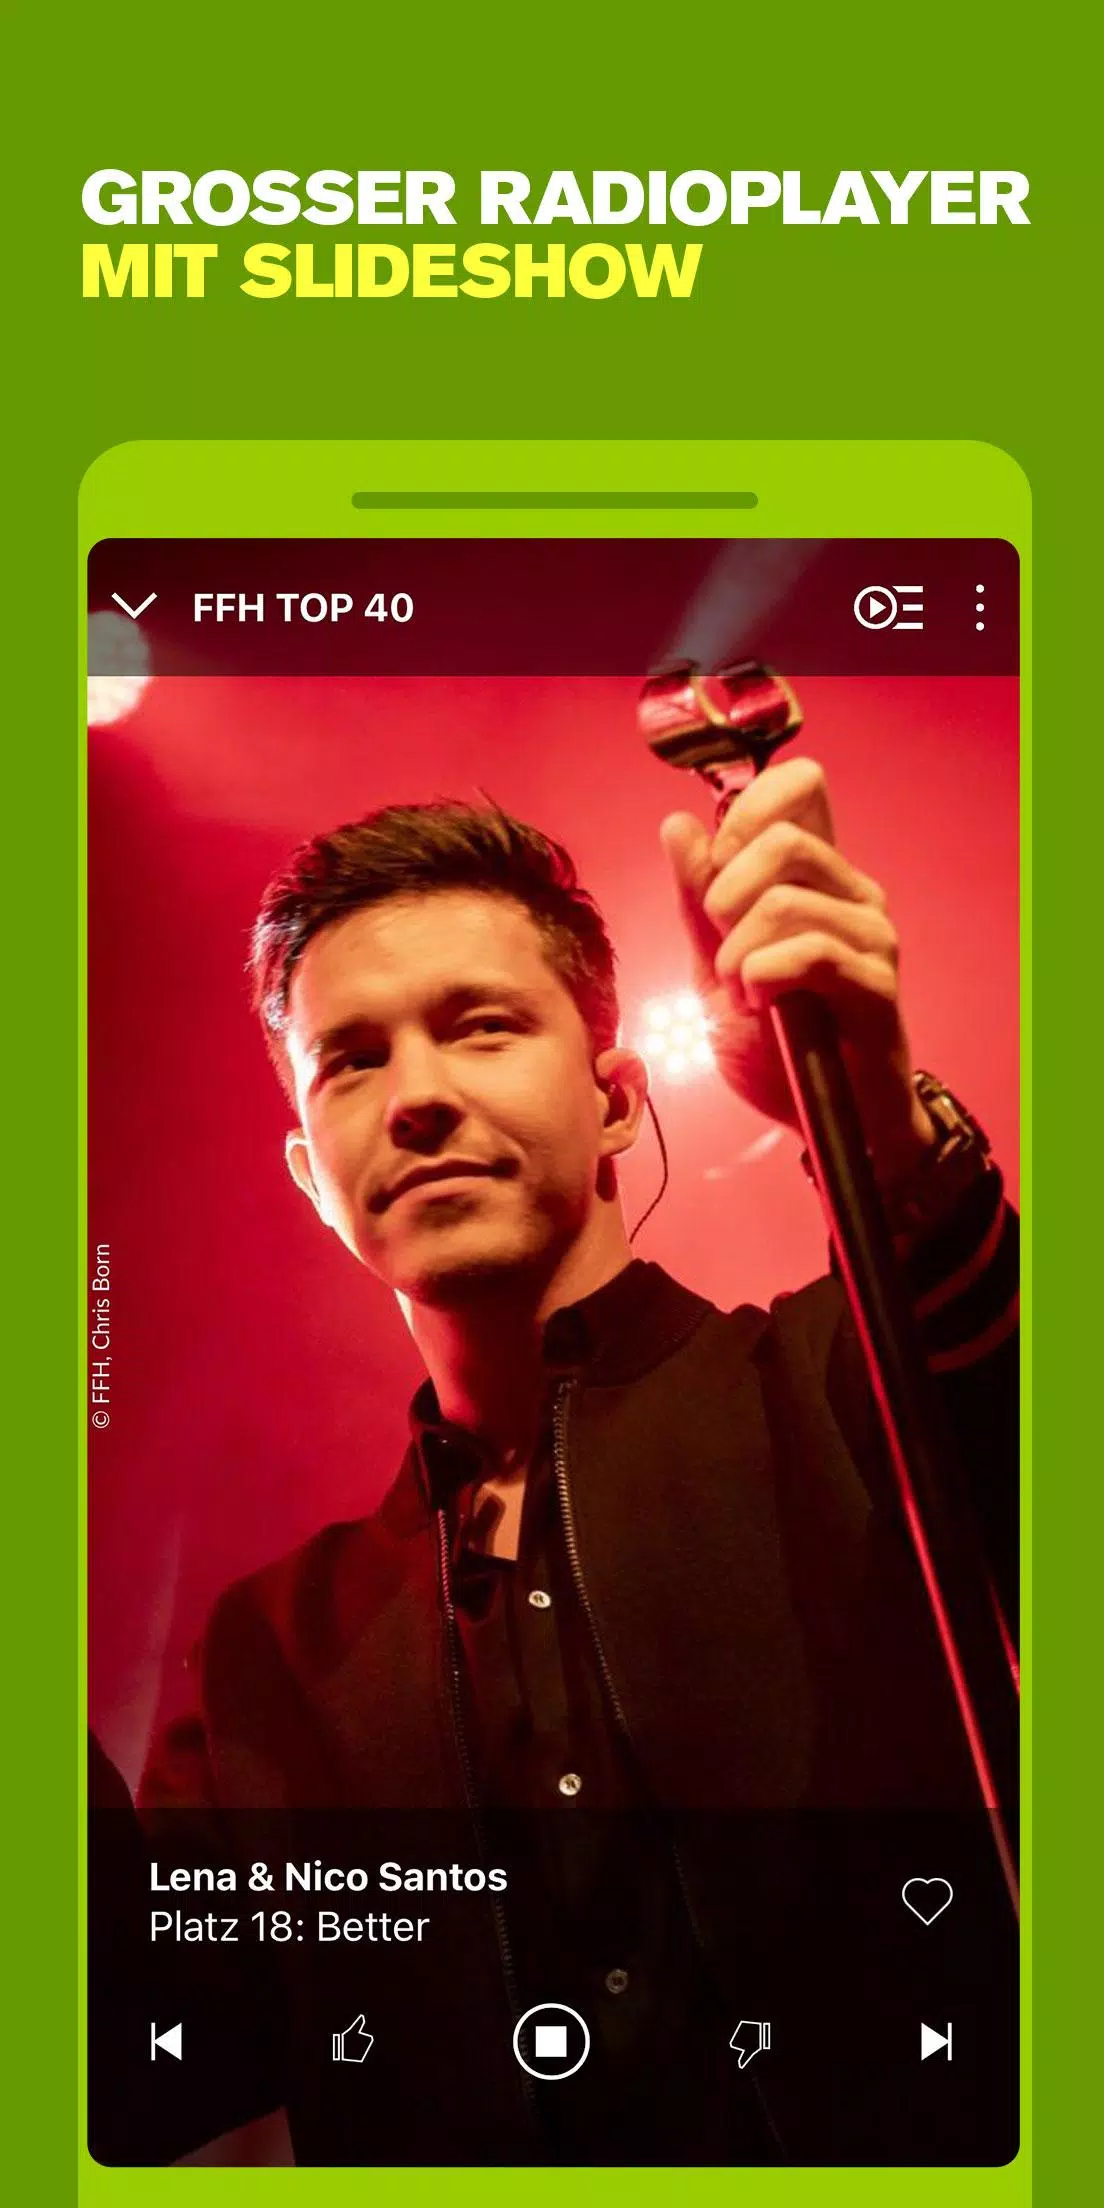 HIT RADIO FFH for Android - APK Download